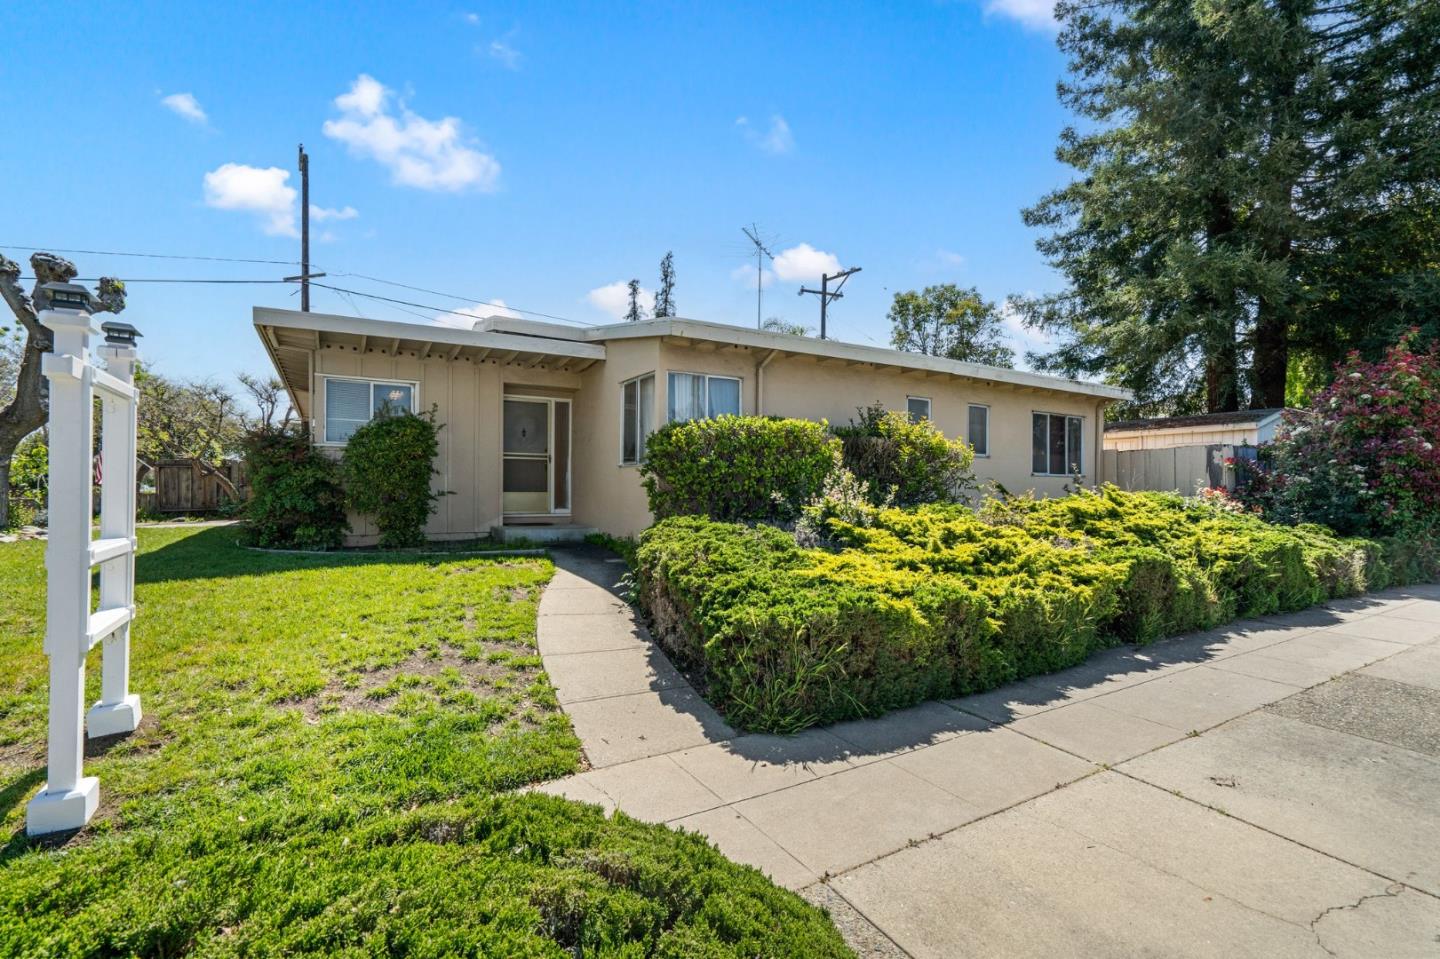 Photo of 1150 Lafayette Dr in Sunnyvale, CA